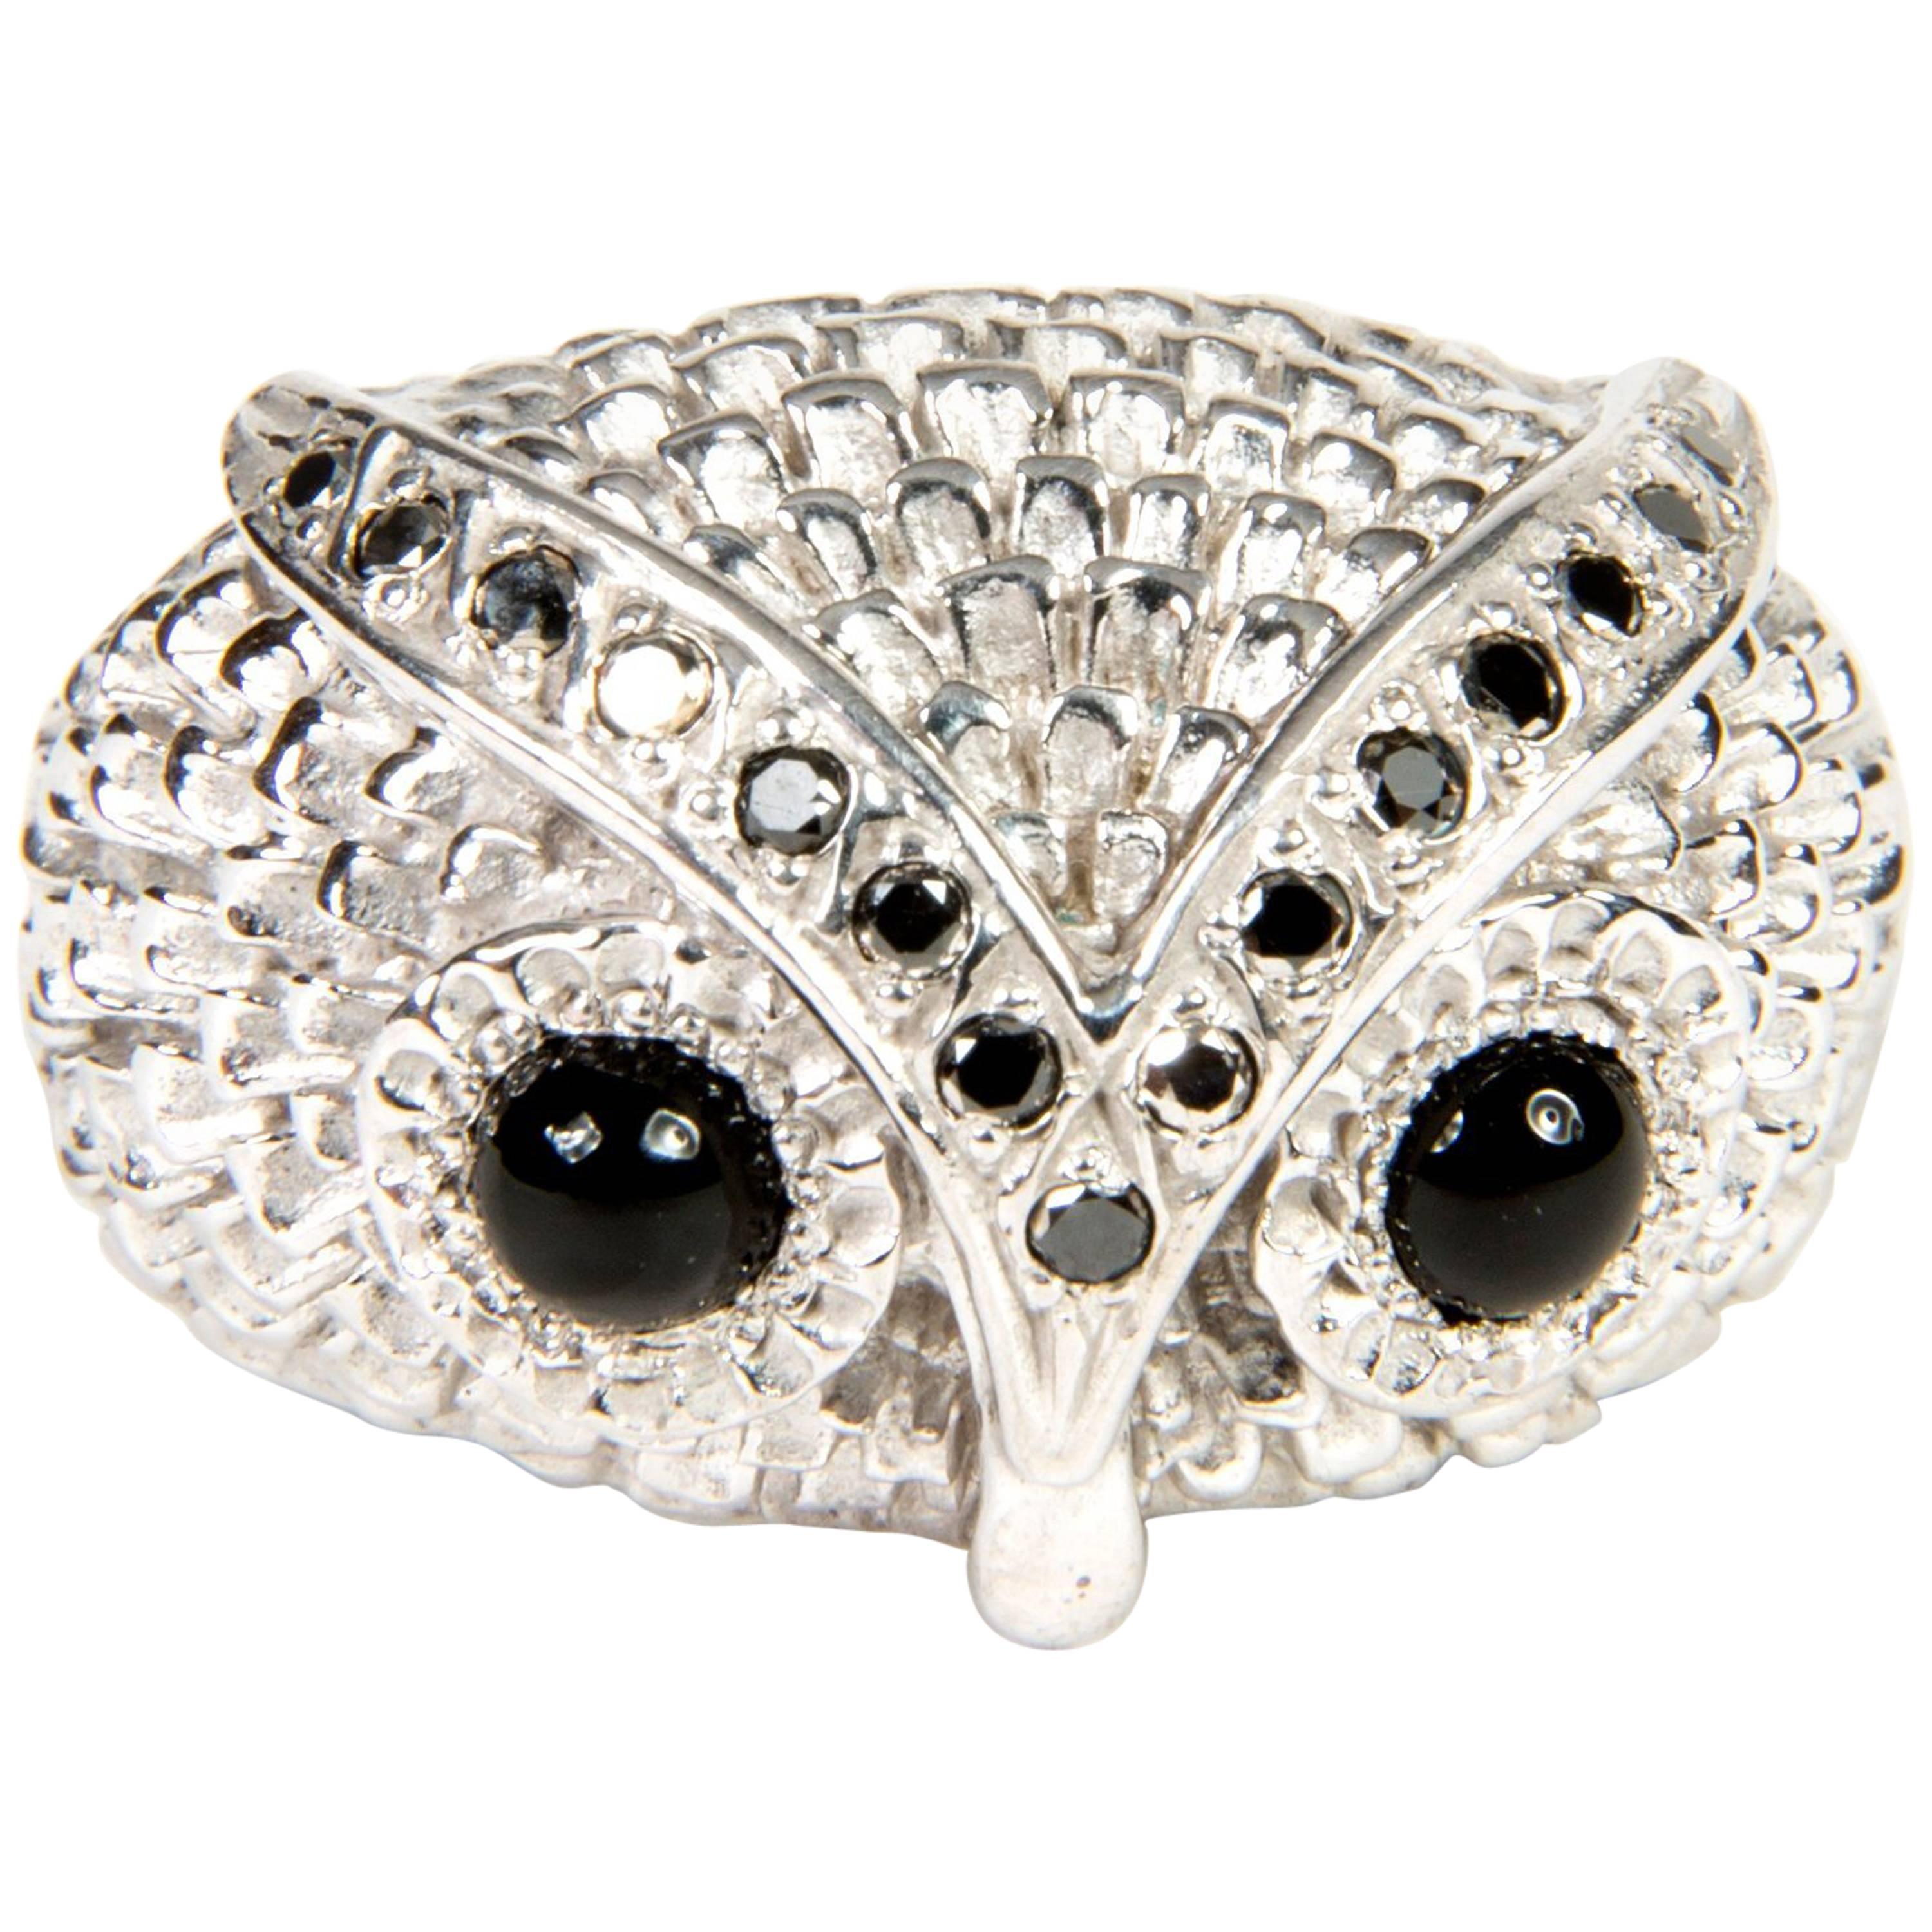 Unique handcrafted ring portraying this amazing owl (925/silver) to match your dresses and personality. The owl is known as the symbol of Athena - goddess of wisdom and strategy - as well as the guardian of Acropolis. Its eyes are made of onyx